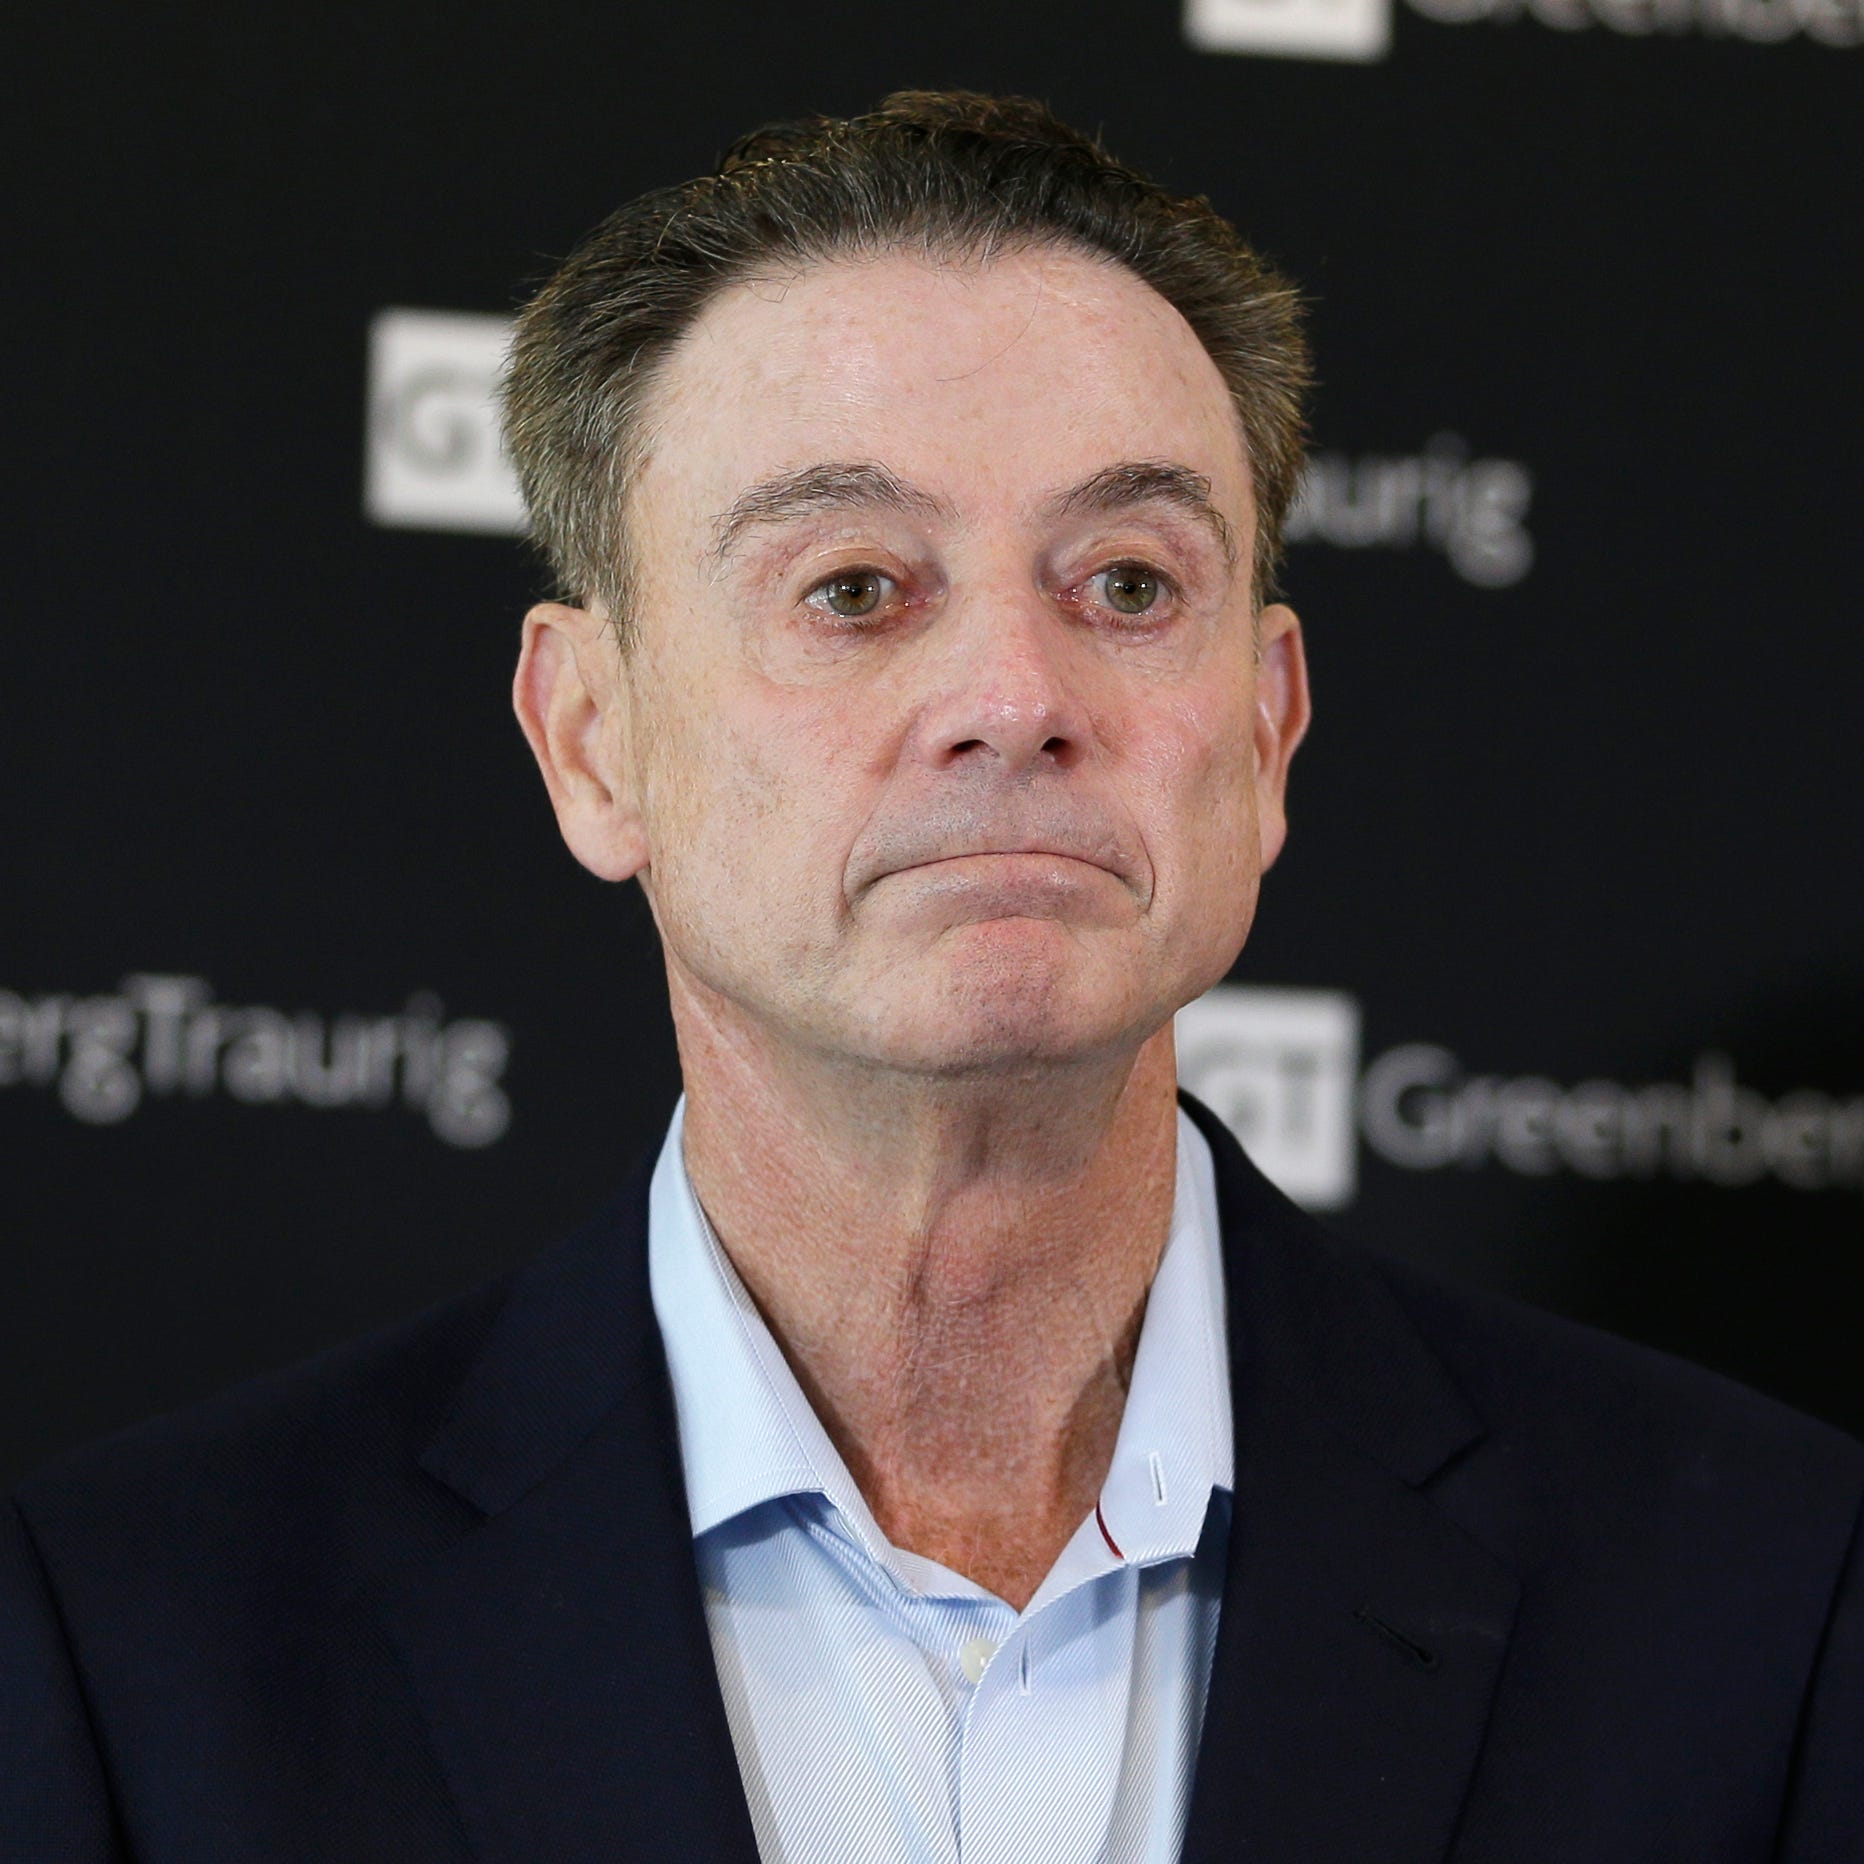 Former Louisville basketball coach Rick Pitino talks to reporters during a news conference in New York, Wednesday, Feb. 21, 2018. Pitino held the news conference in the wake of an NCAA decision in a sex scandal case that strips the Cardinals program 